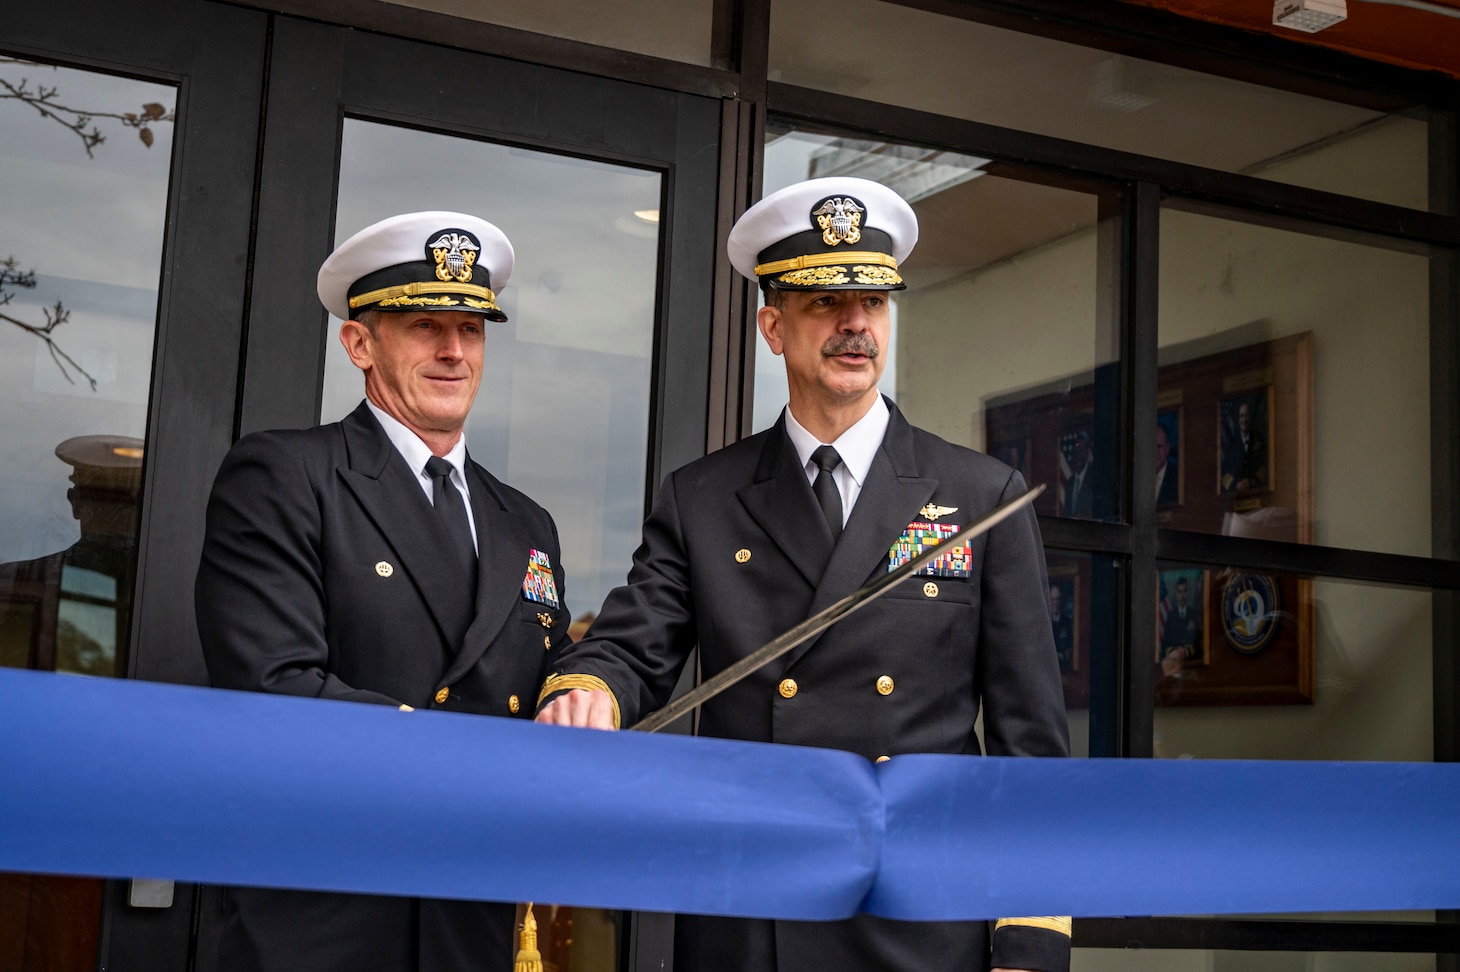 Rear Adm. Michael Steffen and Capt. Daniel Layton, commanding officer of Mobilization and Deployment Support Command, cut a ribbon during the launch ceremony for Mobilization and Deployment Support Command.